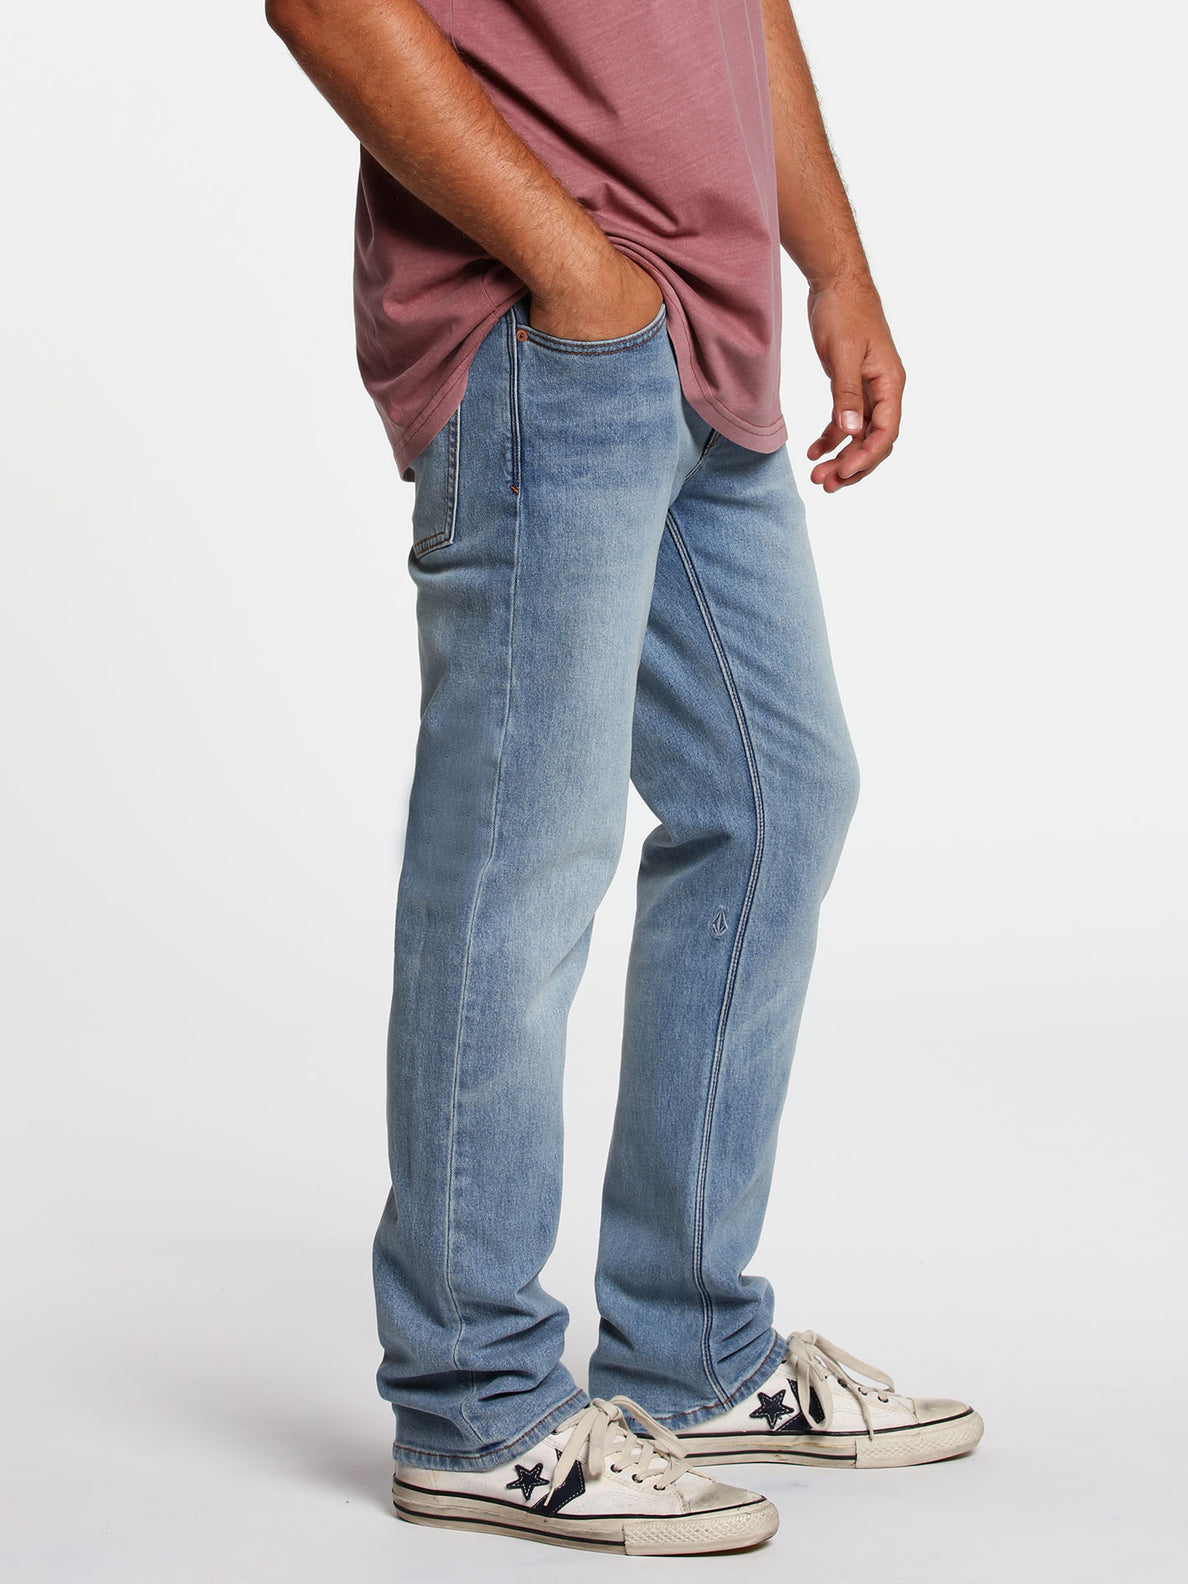 Solver Modern Fit Jeans - Light Wicked Blue